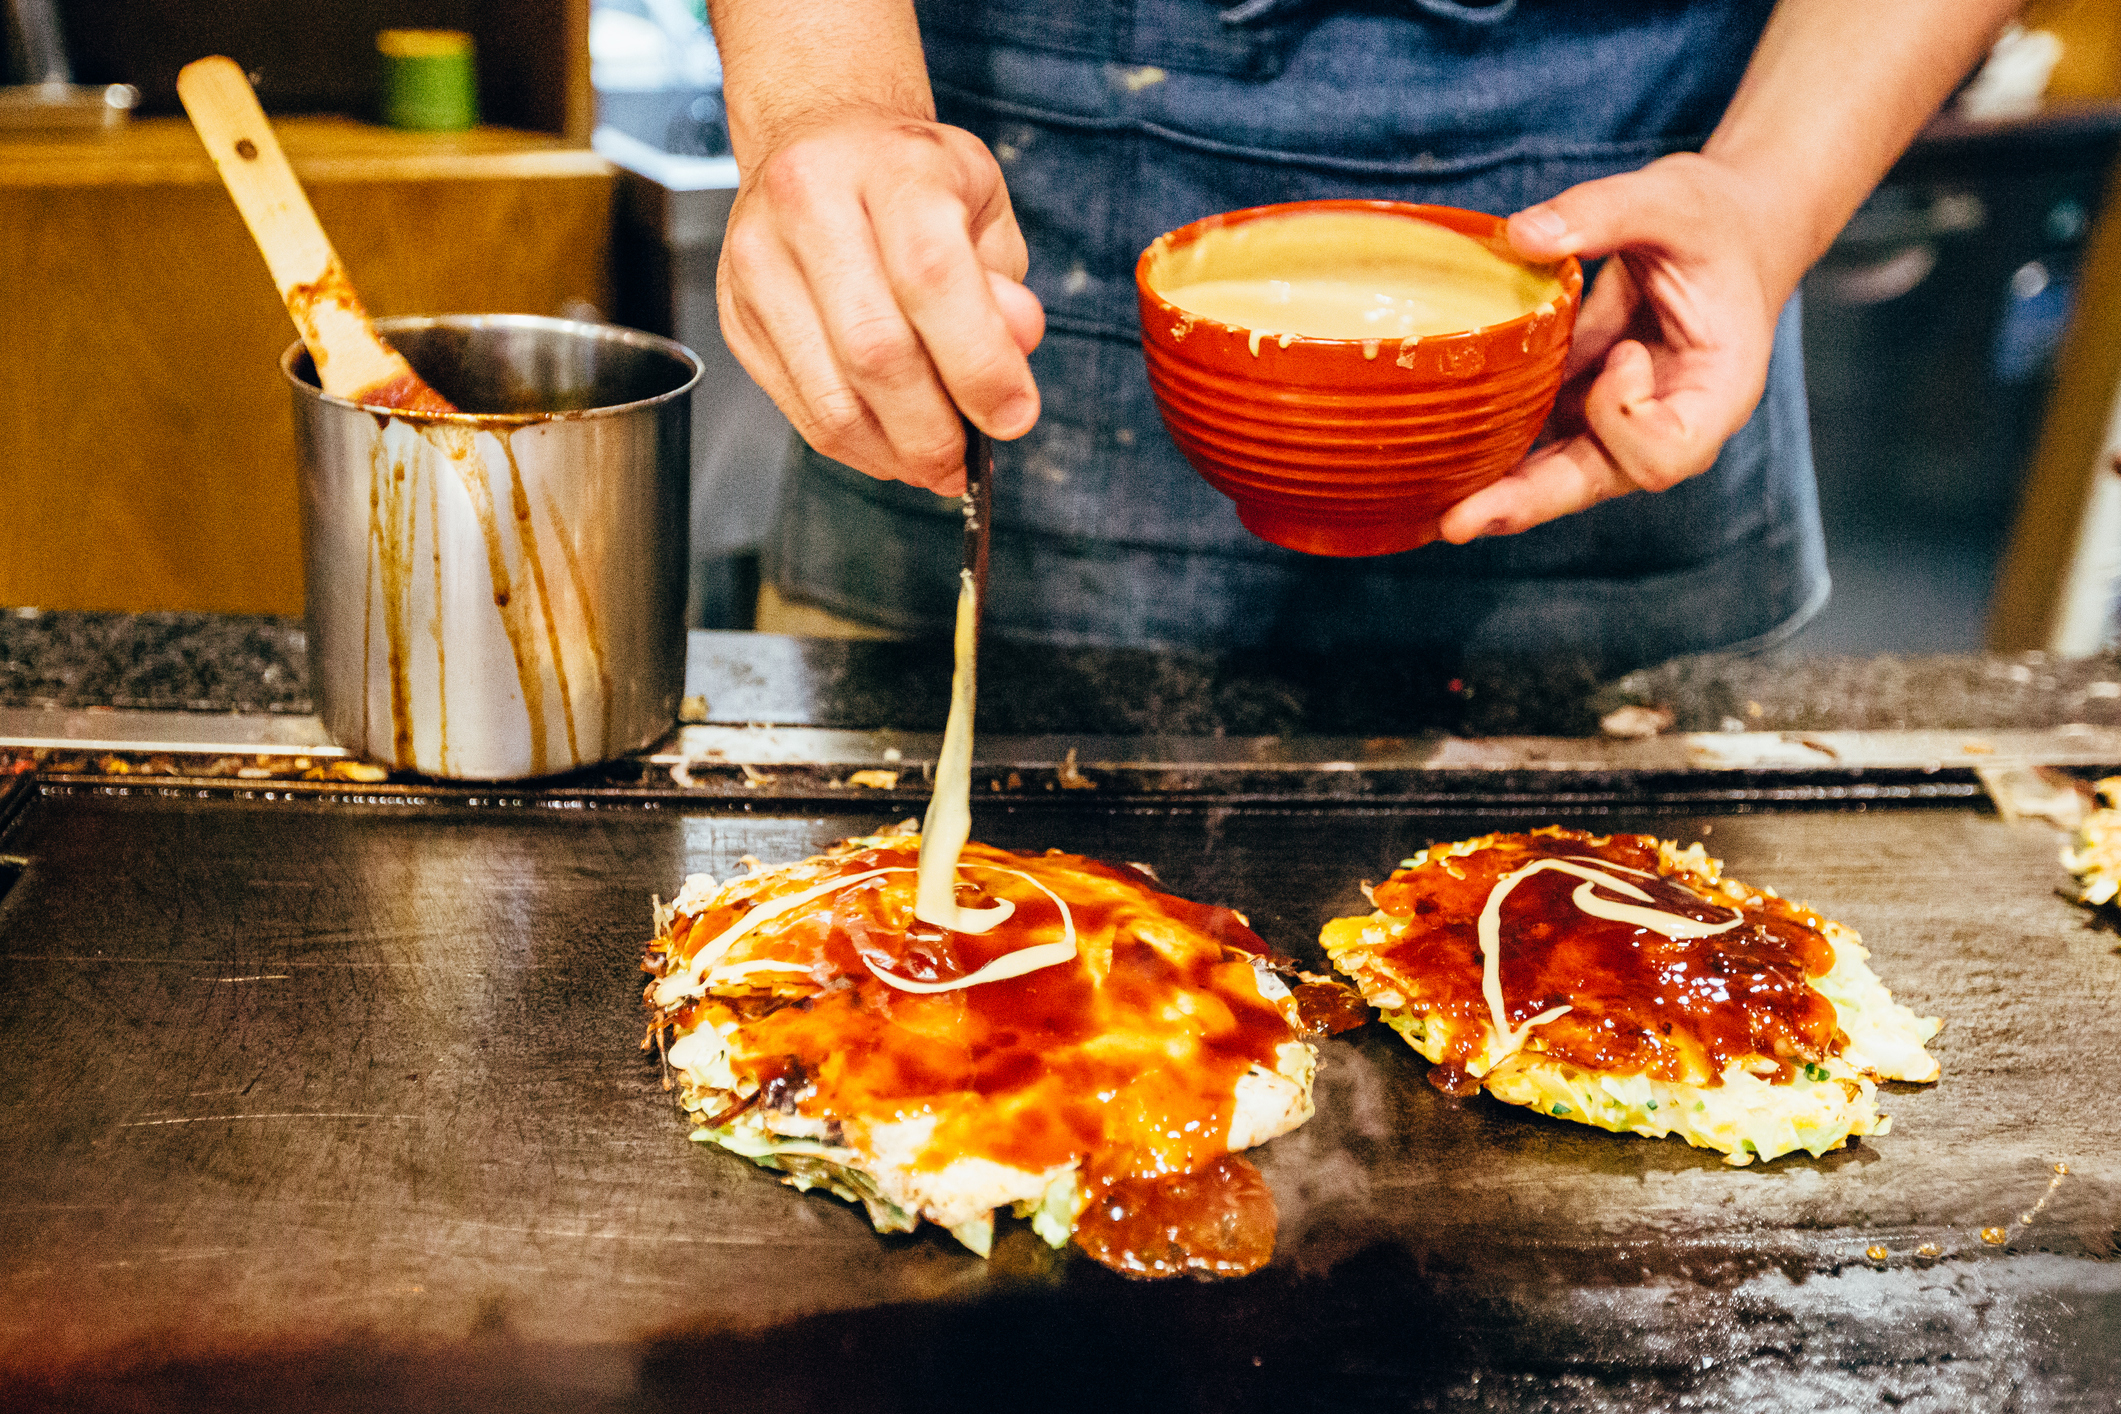 Person in an apron pours sauce on okonomiyaki (Japanese pancakes) at a grill station